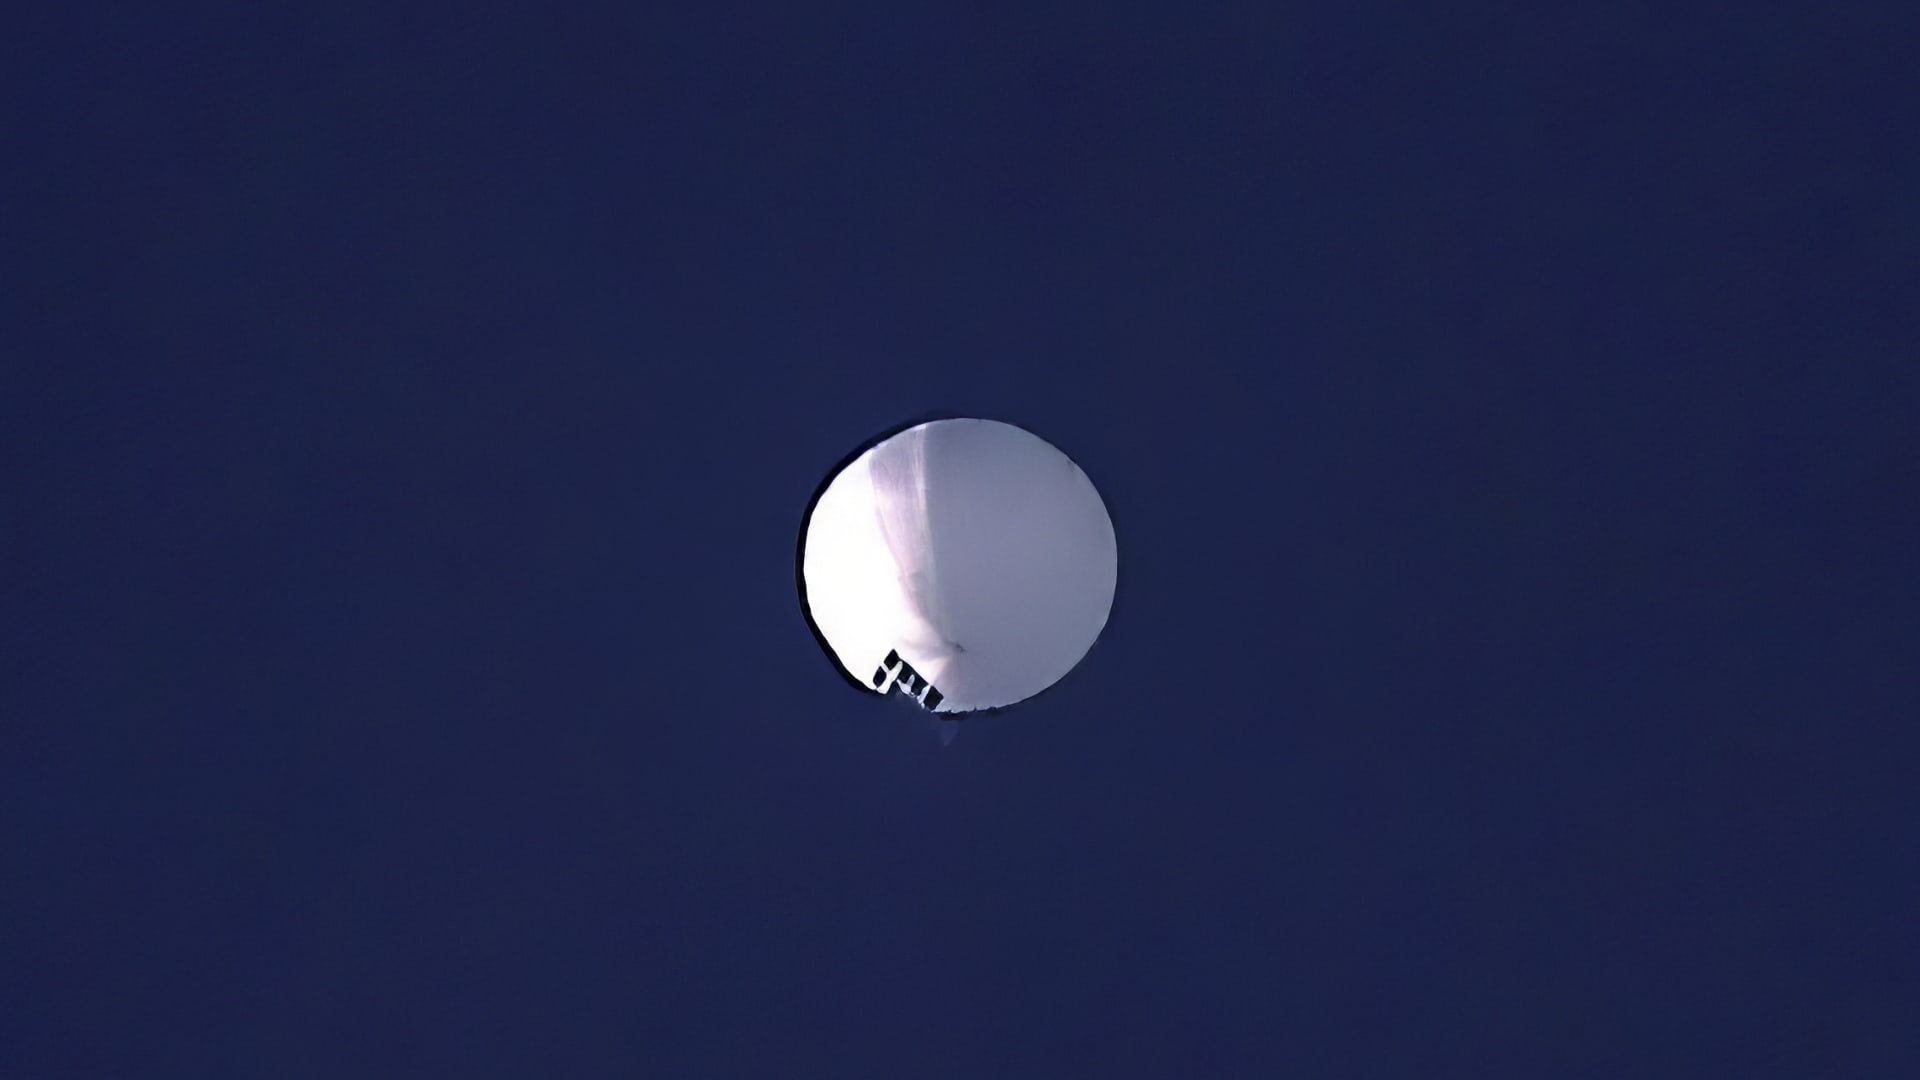 A high altitude balloon floats over Billings, Mont., on Wednesday, Feb. 1, 2023. The U.S. is tracking a suspected Chinese surveillance balloon that has been spotted over U.S. airspace for a couple days, but the Pentagon decided not to shoot it down due to risks of harm for people on the ground, officials said Thursday, Feb. 2, 2023. The Pentagon would not confirm that the balloon in the photo was the surveillance balloon.